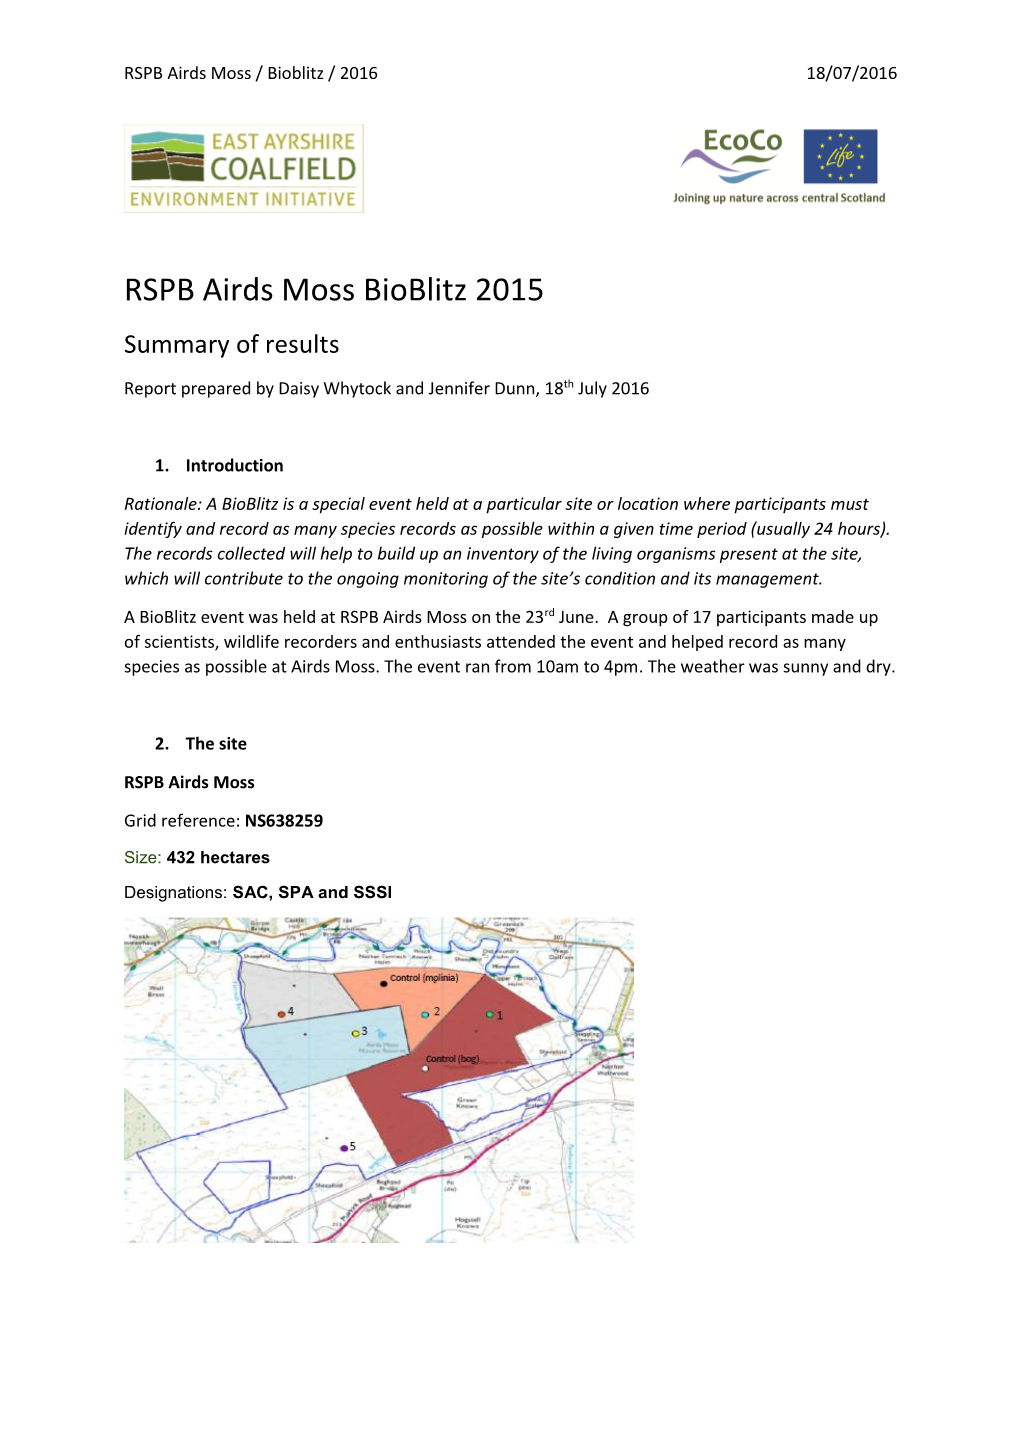 RSPB Airds Moss Bioblitz 2015 Summary of Results